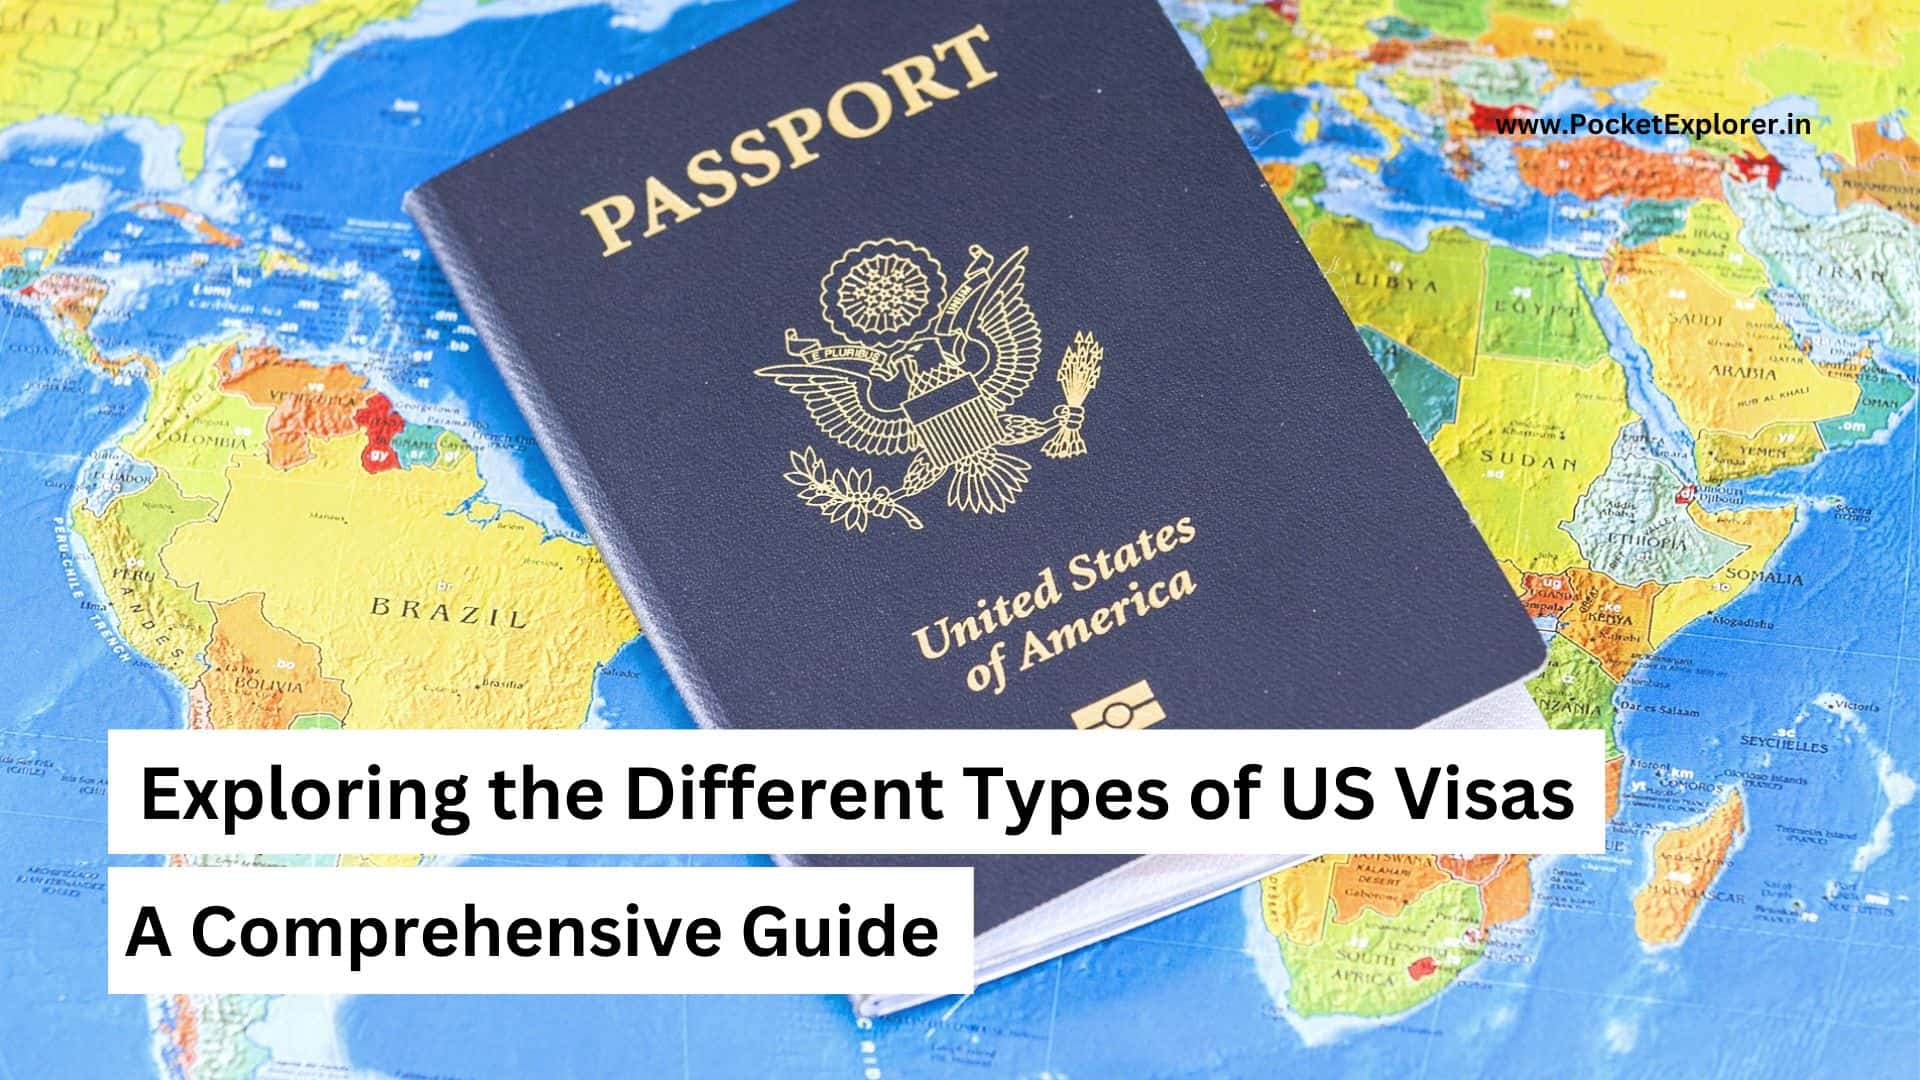 Exploring the Different Types of US Visas: A Comprehensive GuideExploring the Different Types of US Visas: A Comprehensive Guide